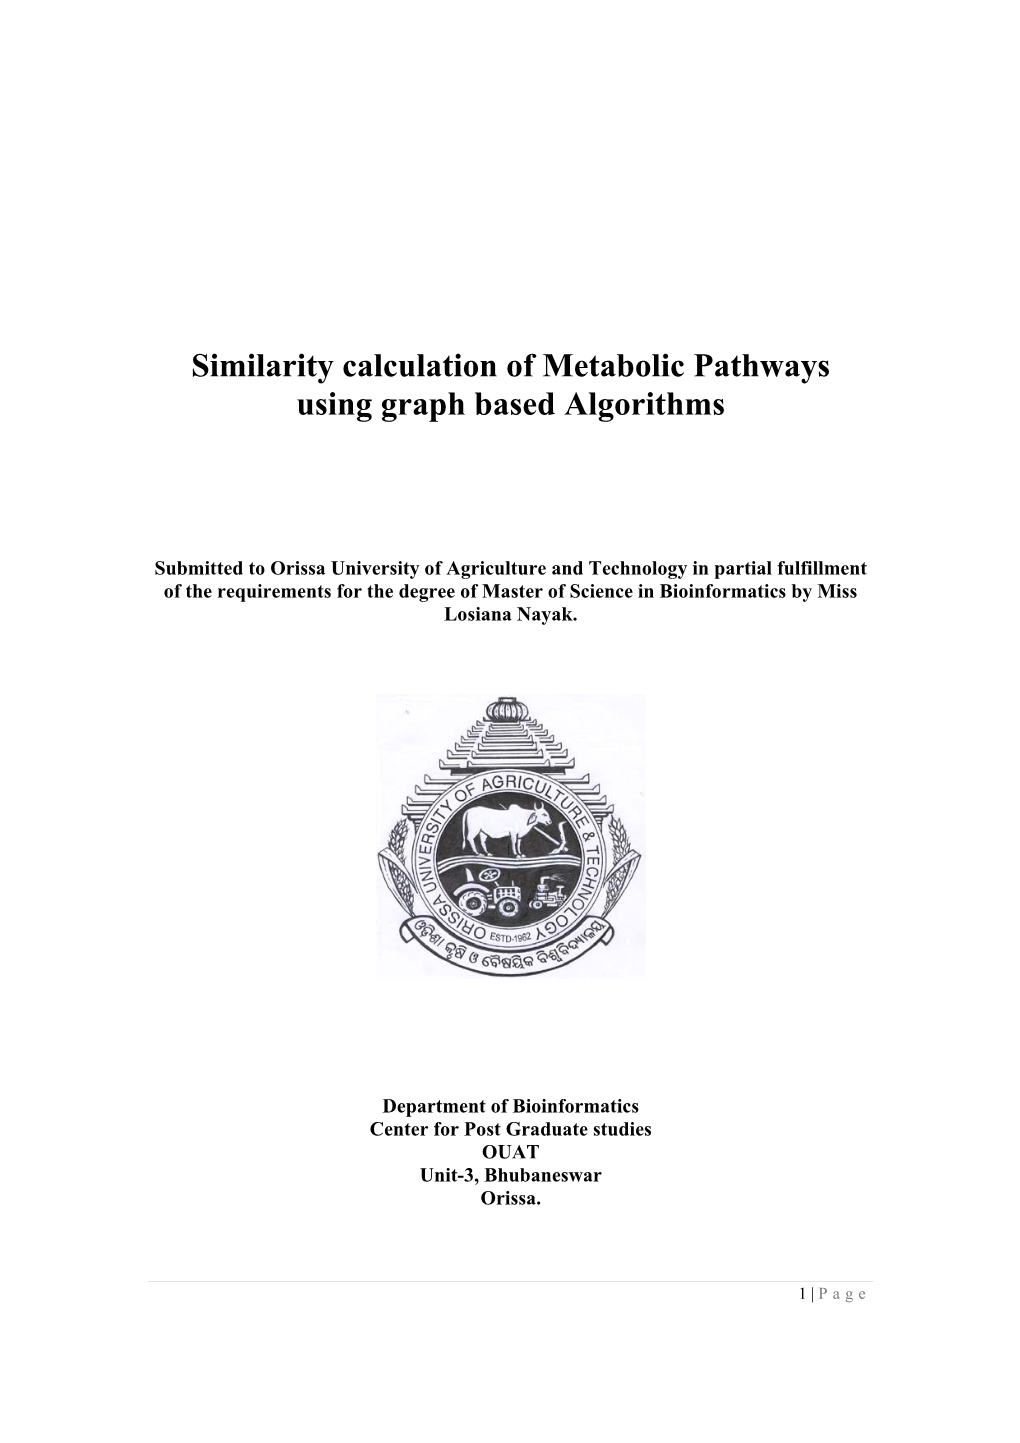 Similarity Calculation of Metabolic Pathways Using Graph Based Algorithms